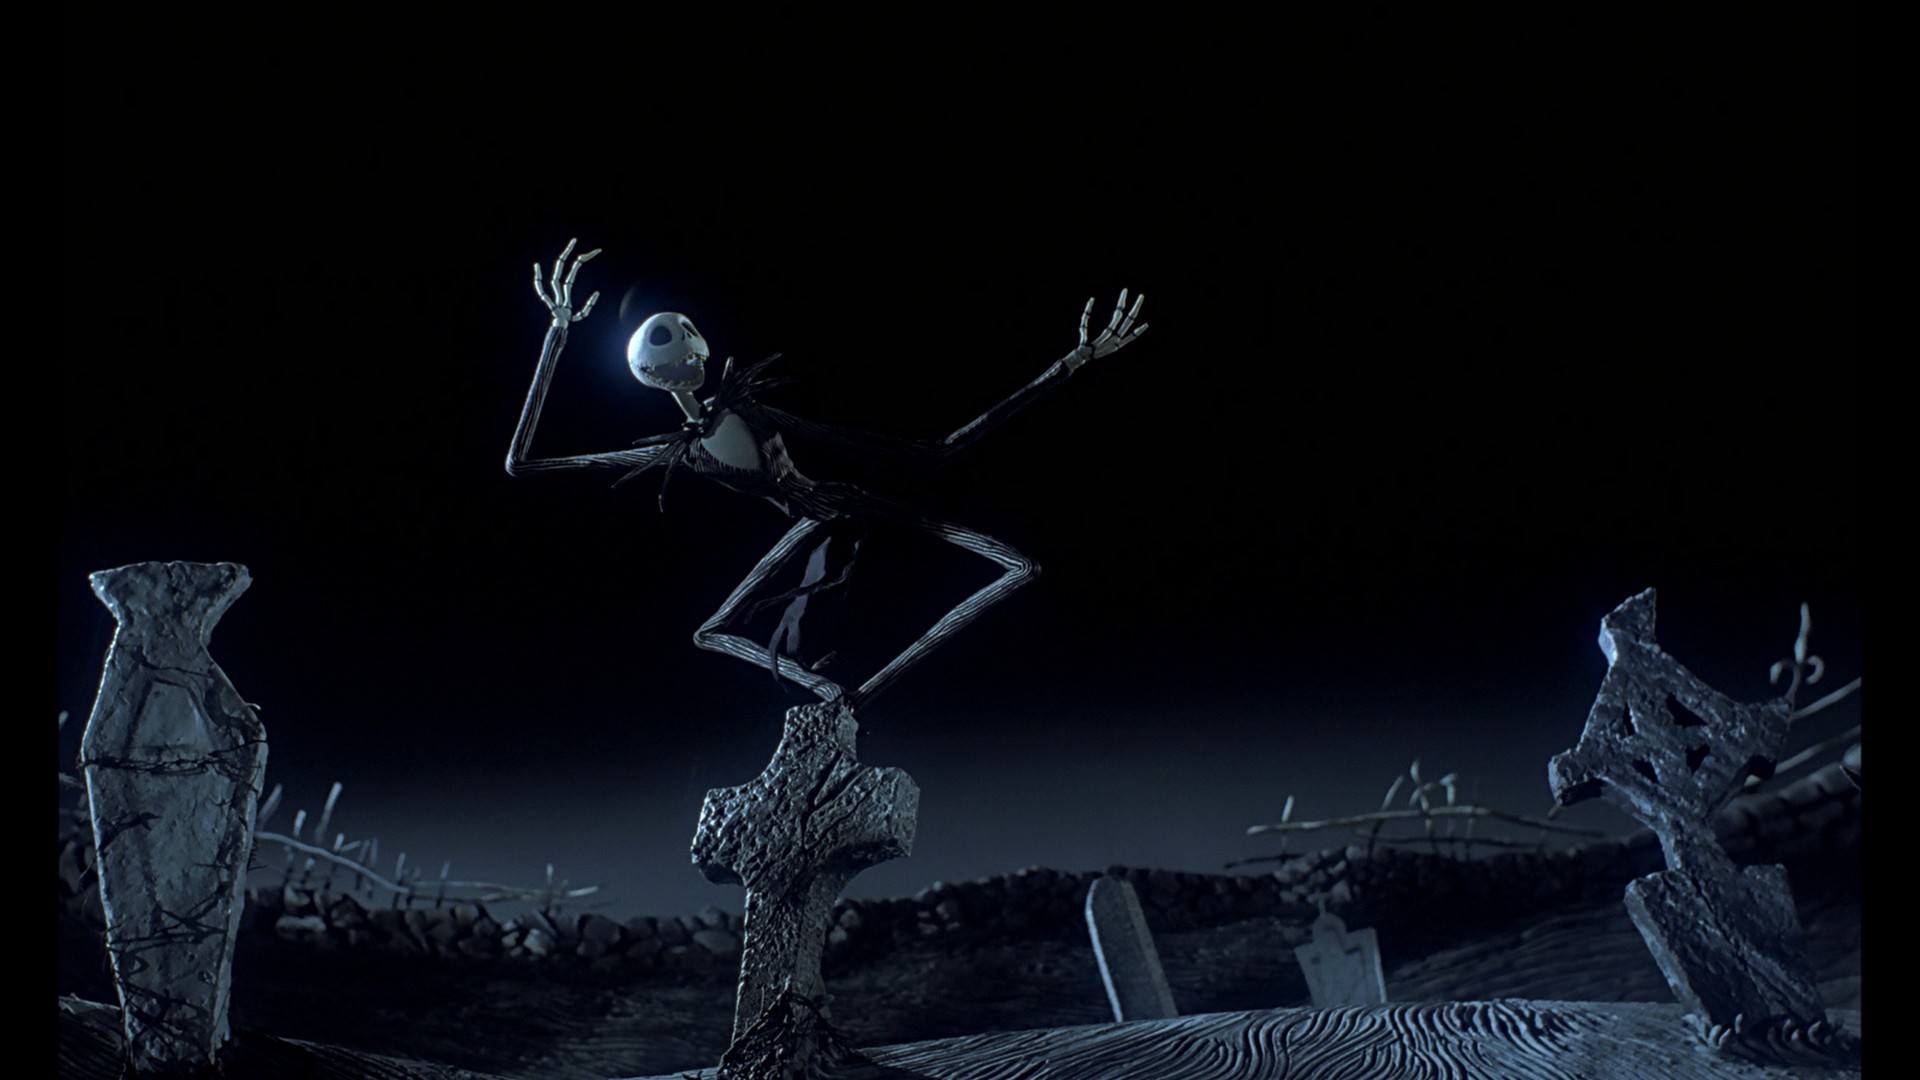 Nightmare Before Christmas Wallpaper Movie with high-resolution 1920x1080 pixel. You can use this poster wallpaper for your Desktop Computers, Mac Screensavers, Windows Backgrounds, iPhone Wallpapers, Tablet or Android Lock screen and another Mobile device